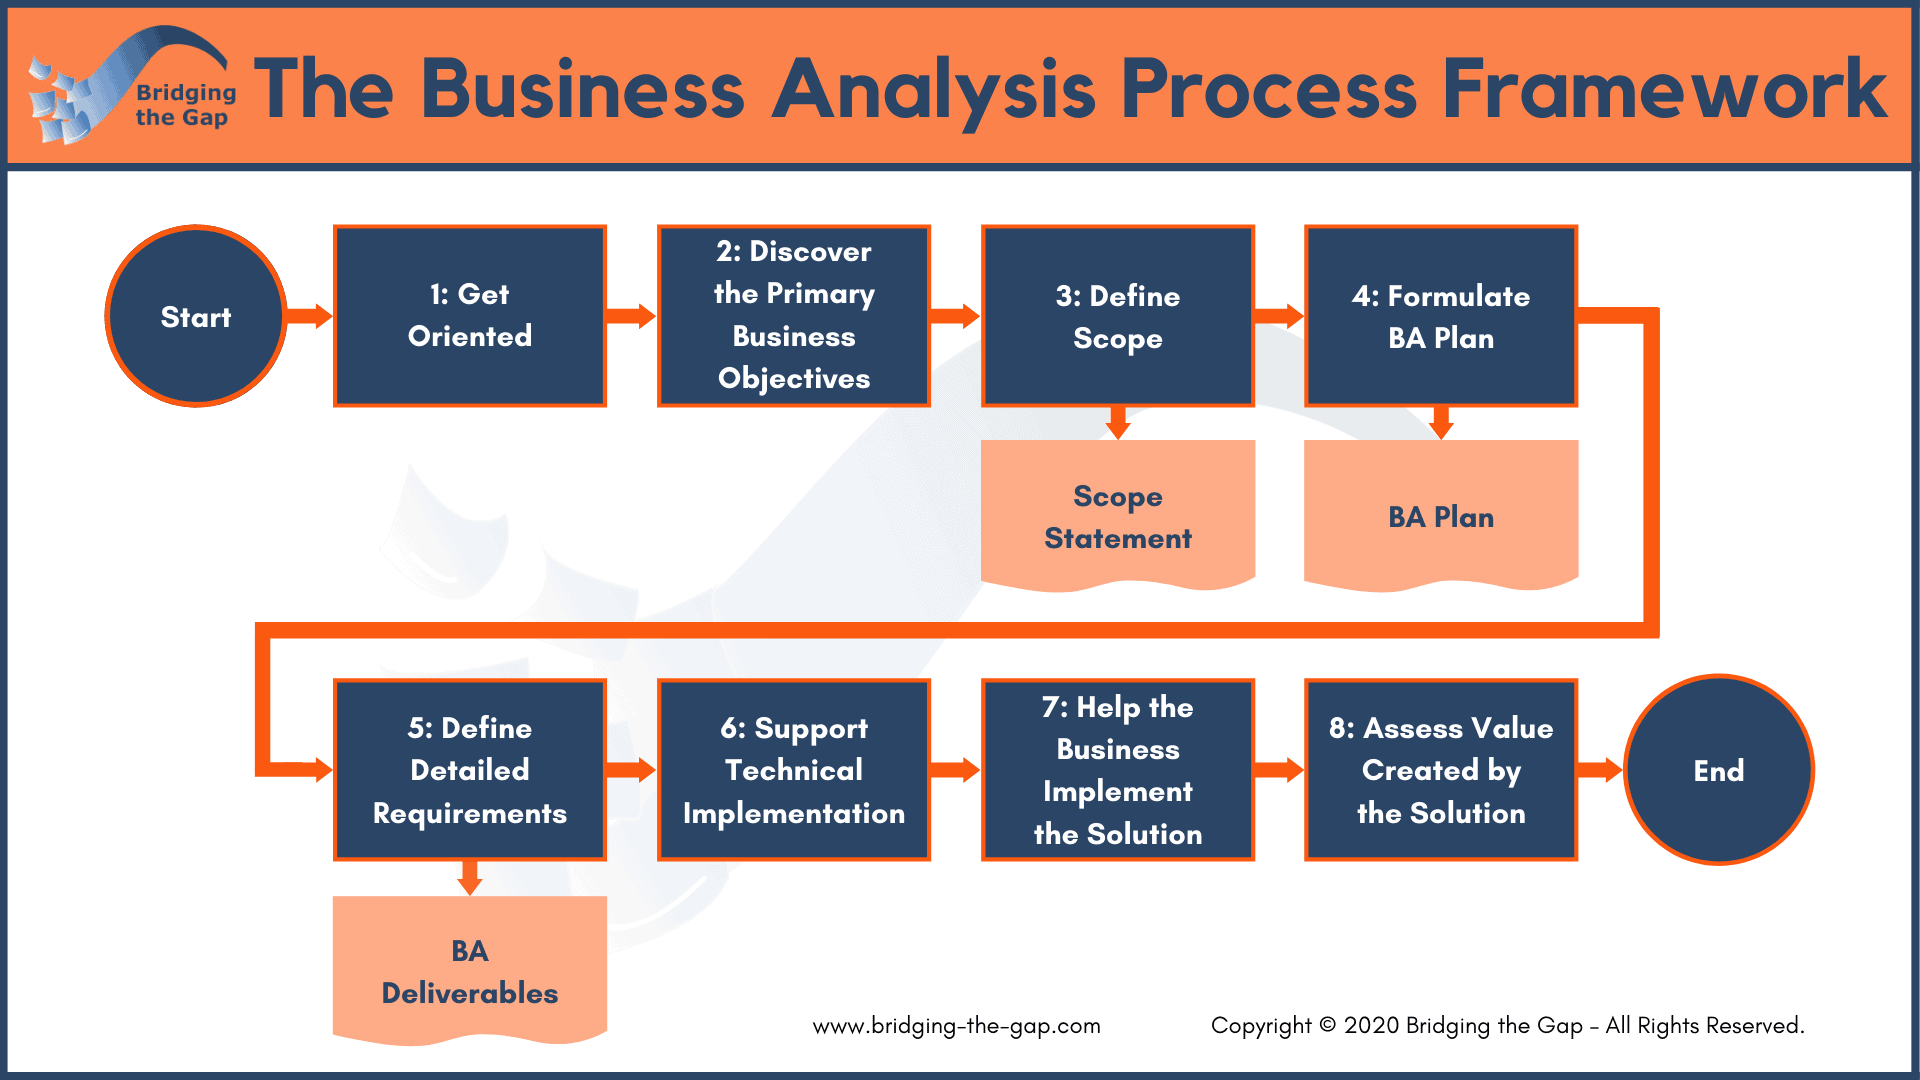 Business Analysis Notes akruppFGCU/RequirementsEngineering GitHub Wiki